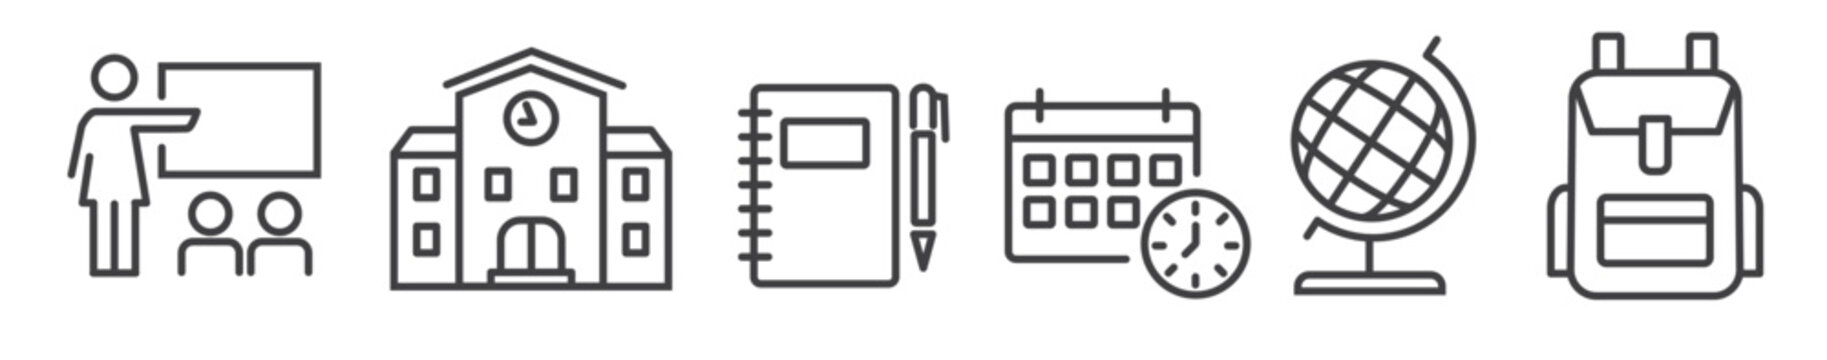 School education - thin line icon collection on white background - vector illustration